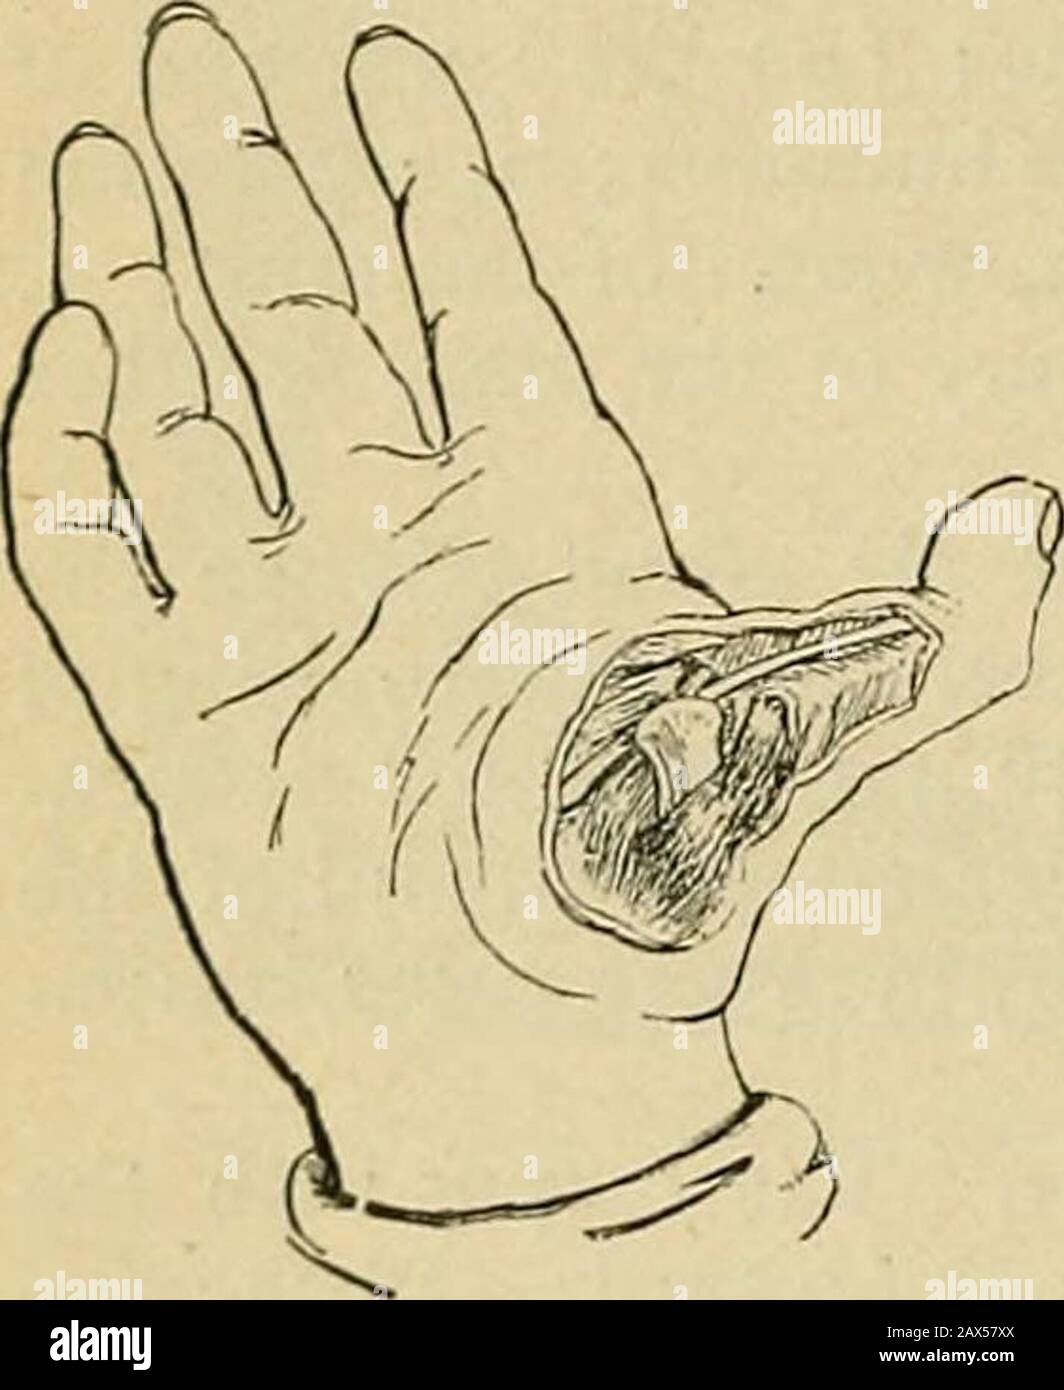 Surgery; its theory and practice . the flexorbrevis and intervening between themetacarpal bone and the phalanx,prevent the articular surfaces of thebones being brought into contact. Treatment.—Press the meta-carpal bone well into the palm of the hand to relax the flexorbrevis polhcis, and bend back the first phalanx on the metacarpalbone until the extremity of the thumb points towards the wrist,thus forcing the base of the phalanx wedge-wise between the twoinsertions of the short flexor. Next flex the phalanx while an as-sistant, by placing his thumb behind its base, prevents its slippingback. Stock Photo